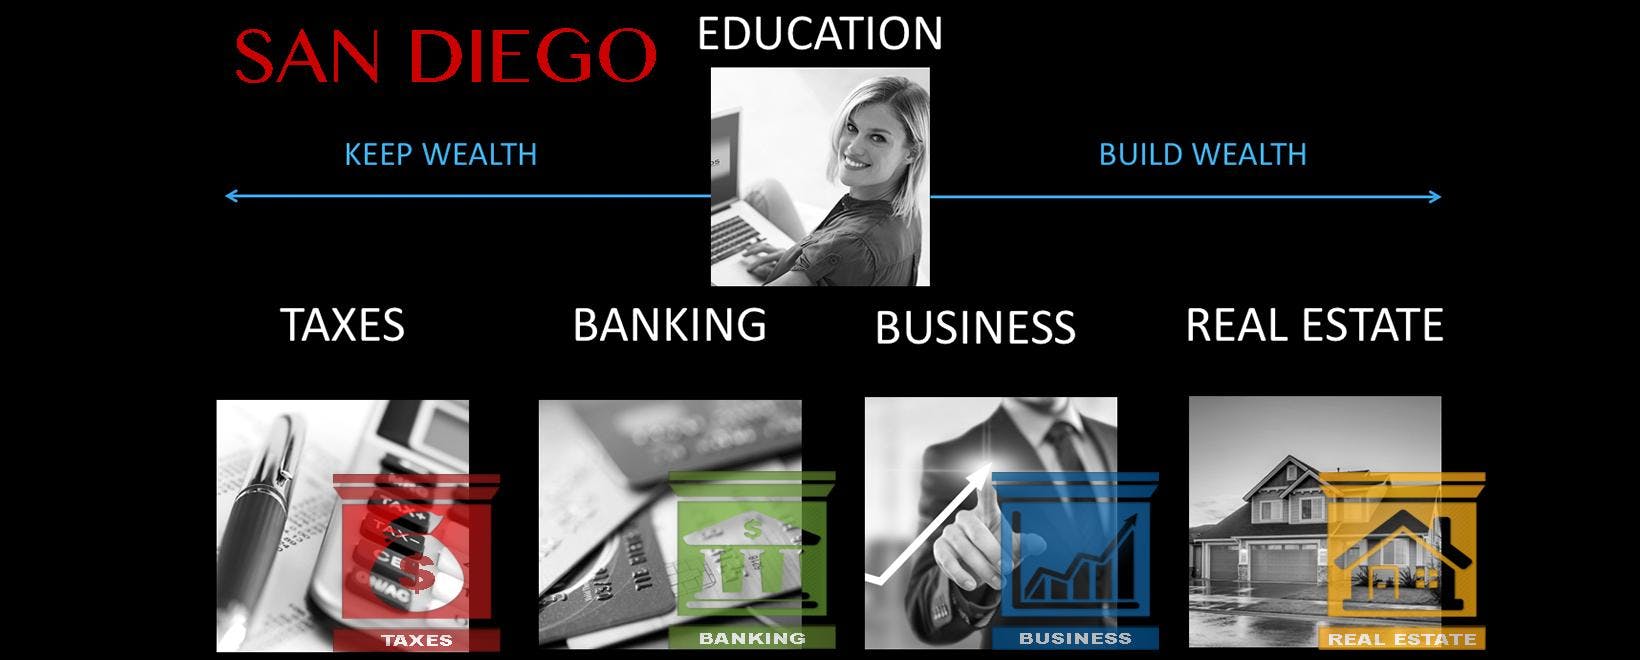  Secrets and Systems of Real Estate and Wealth Creation - San Diego, CA 92126 